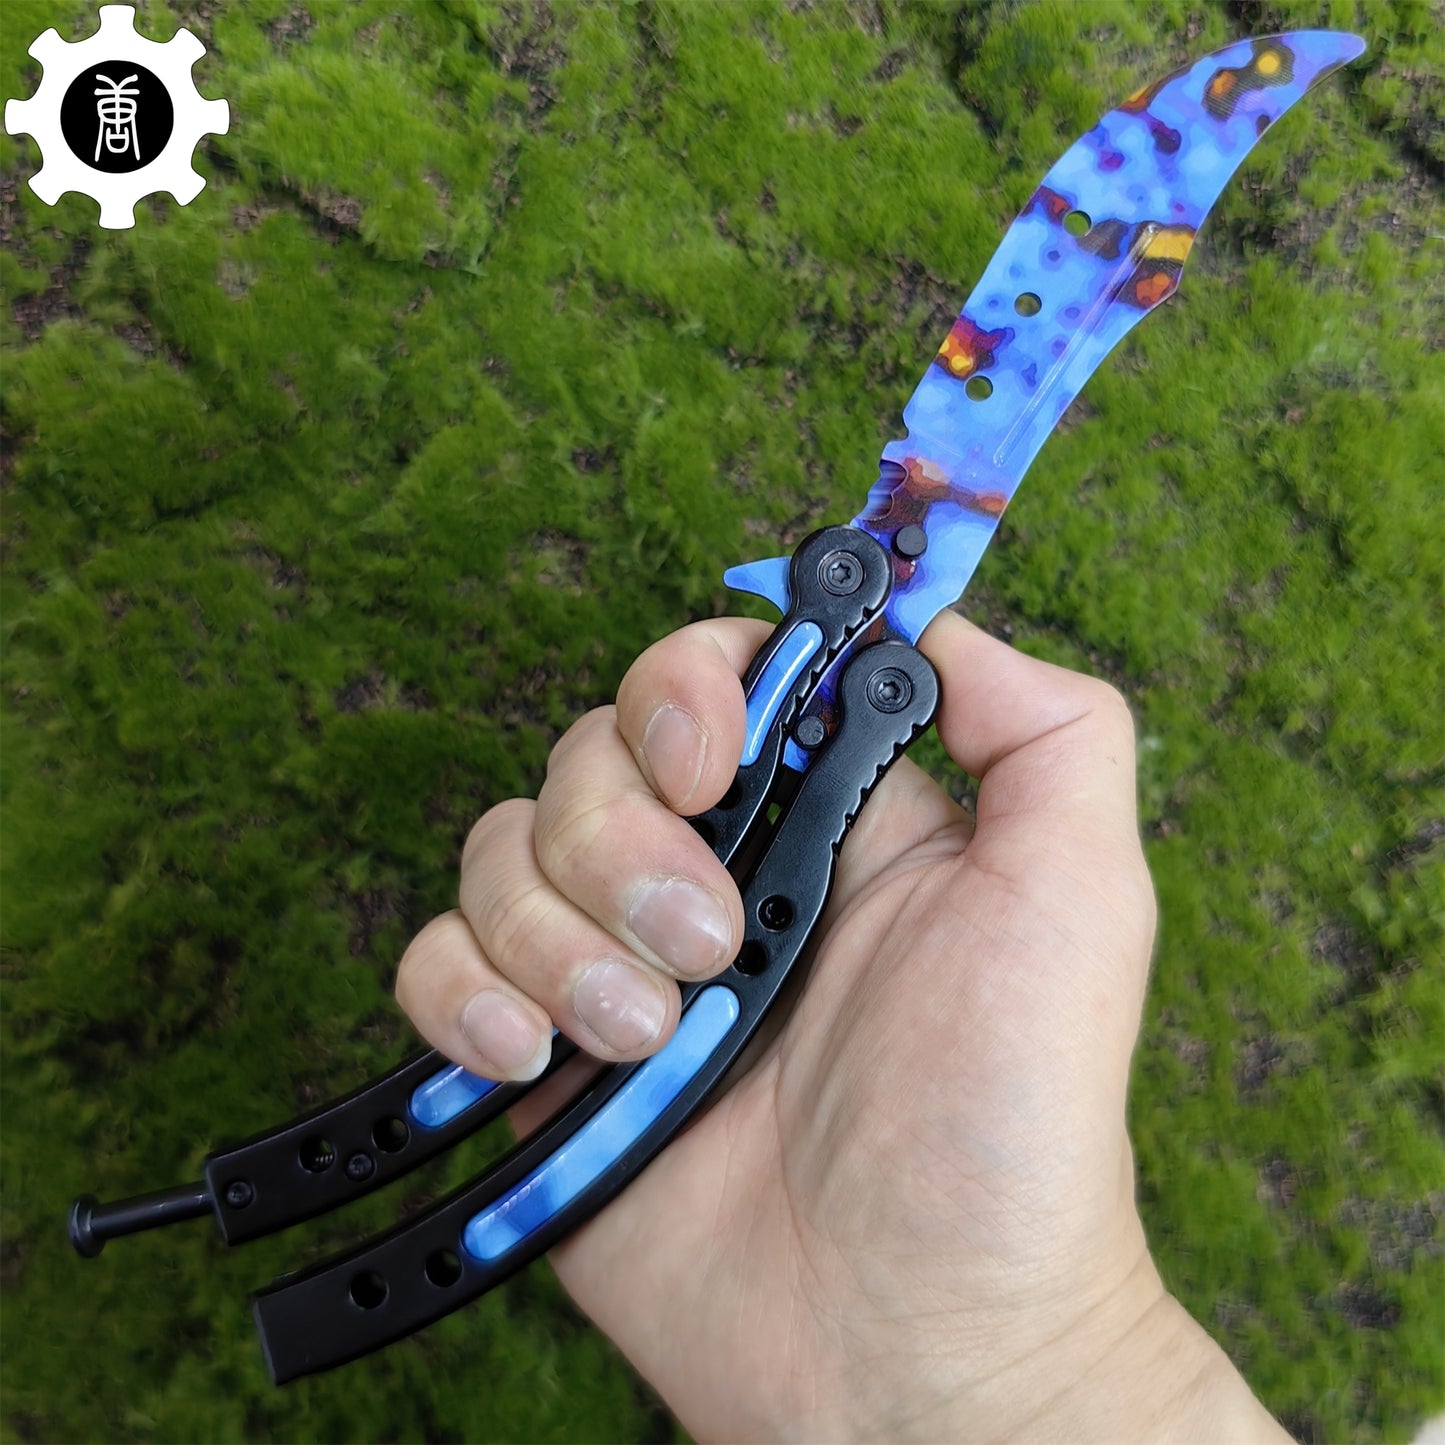 Case Hardened Blue Gem Seed Balisong Game Butterfly Knife 